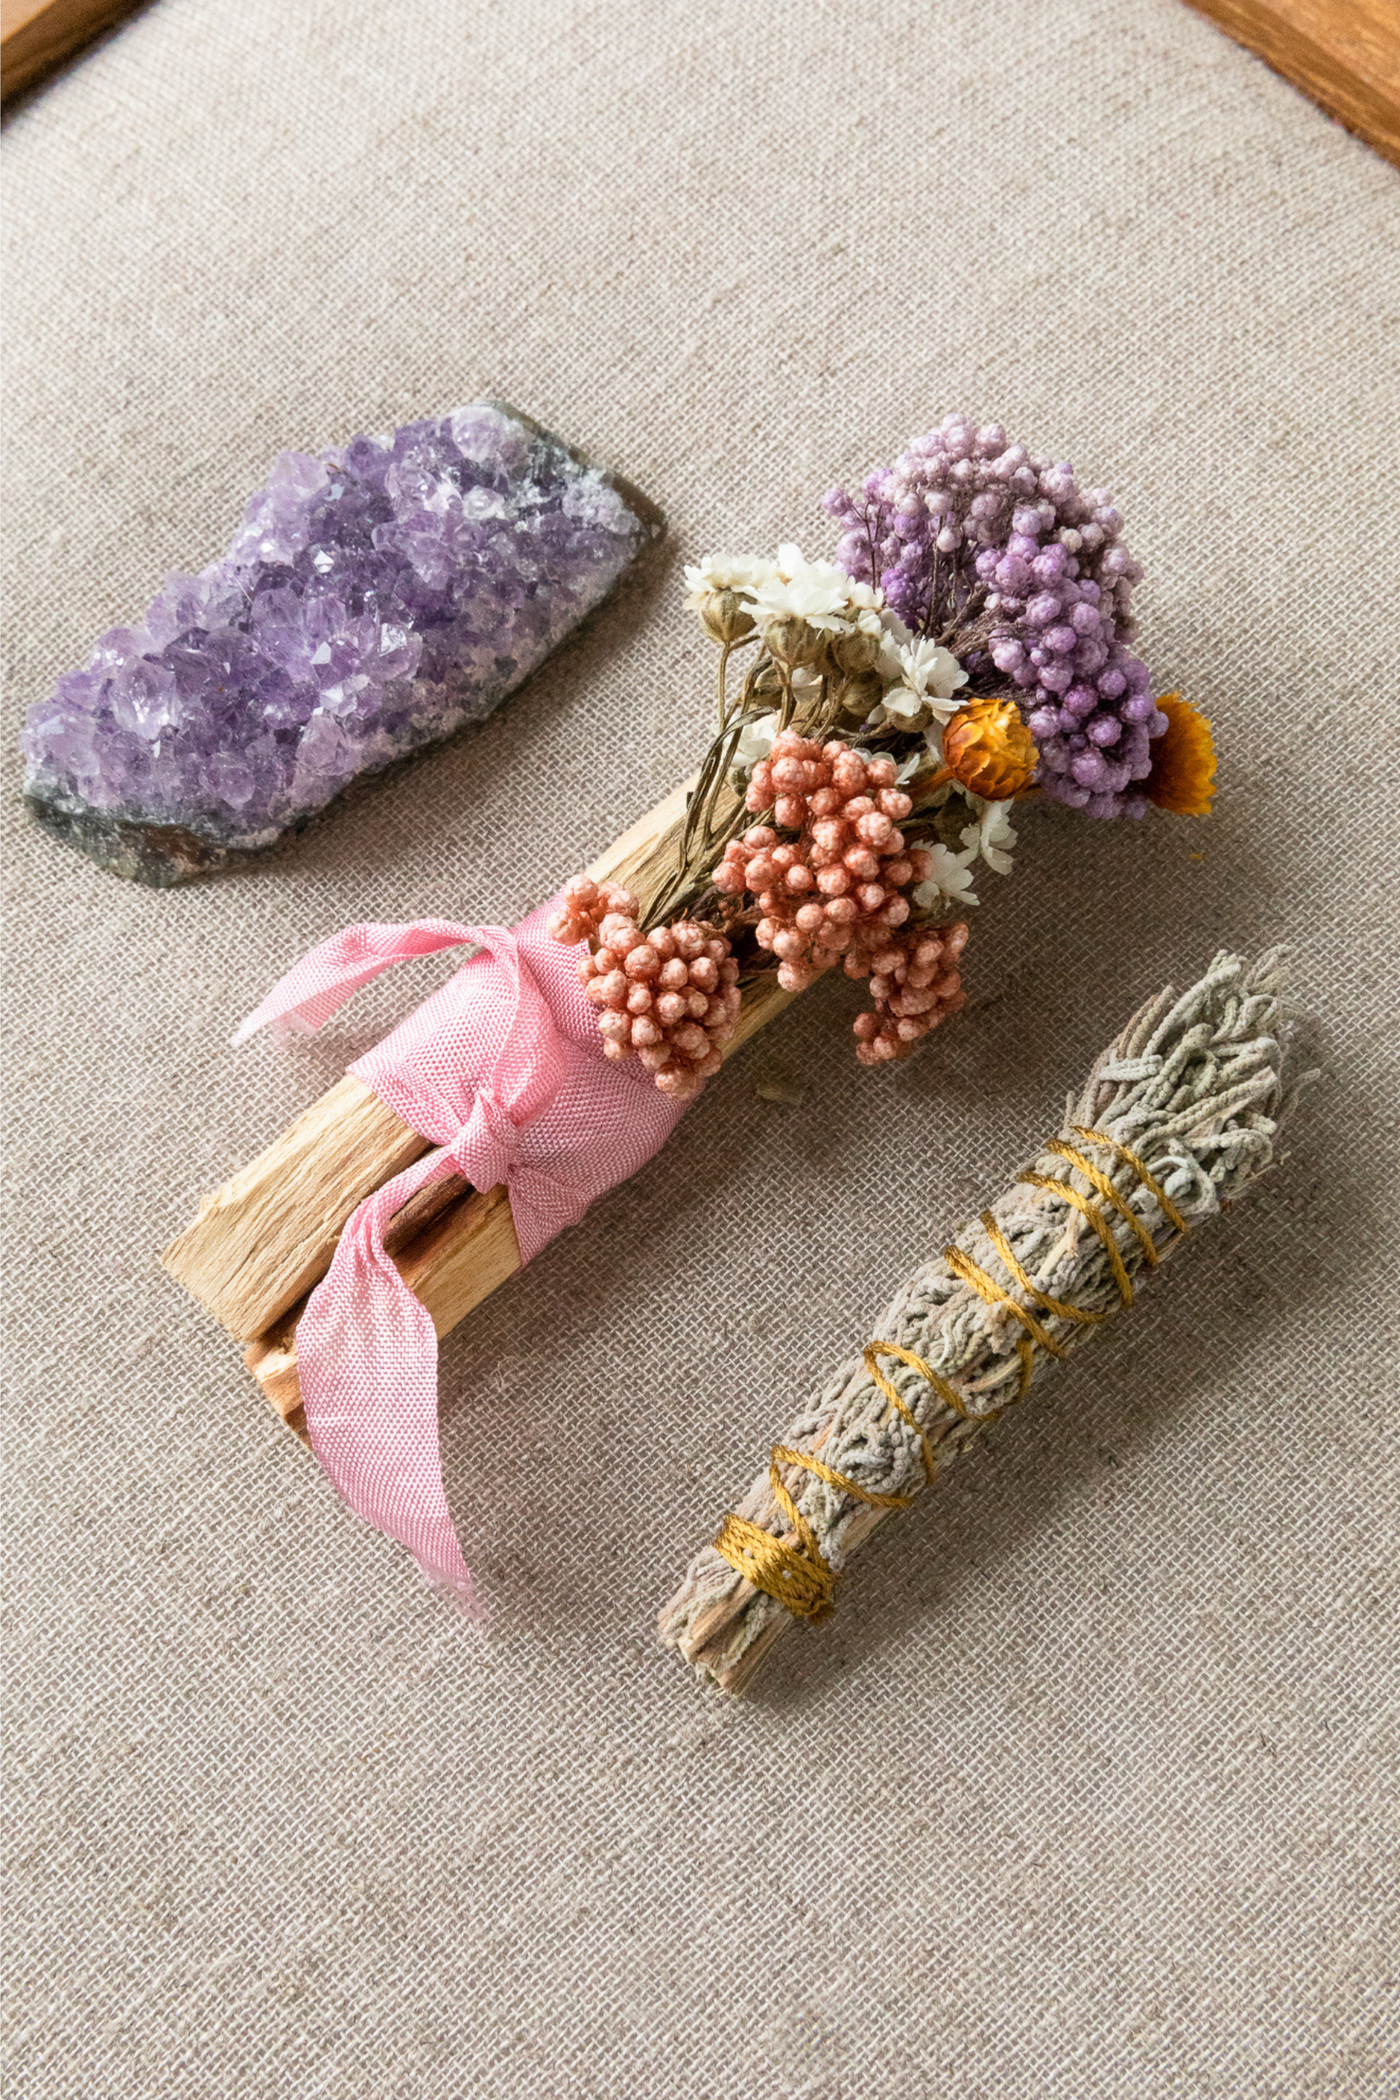 Green Gaea Palo Santo & Crystal Smudge Set, available in Amethyst or Clear Quartz on ZERRIN with free Singapore shipping